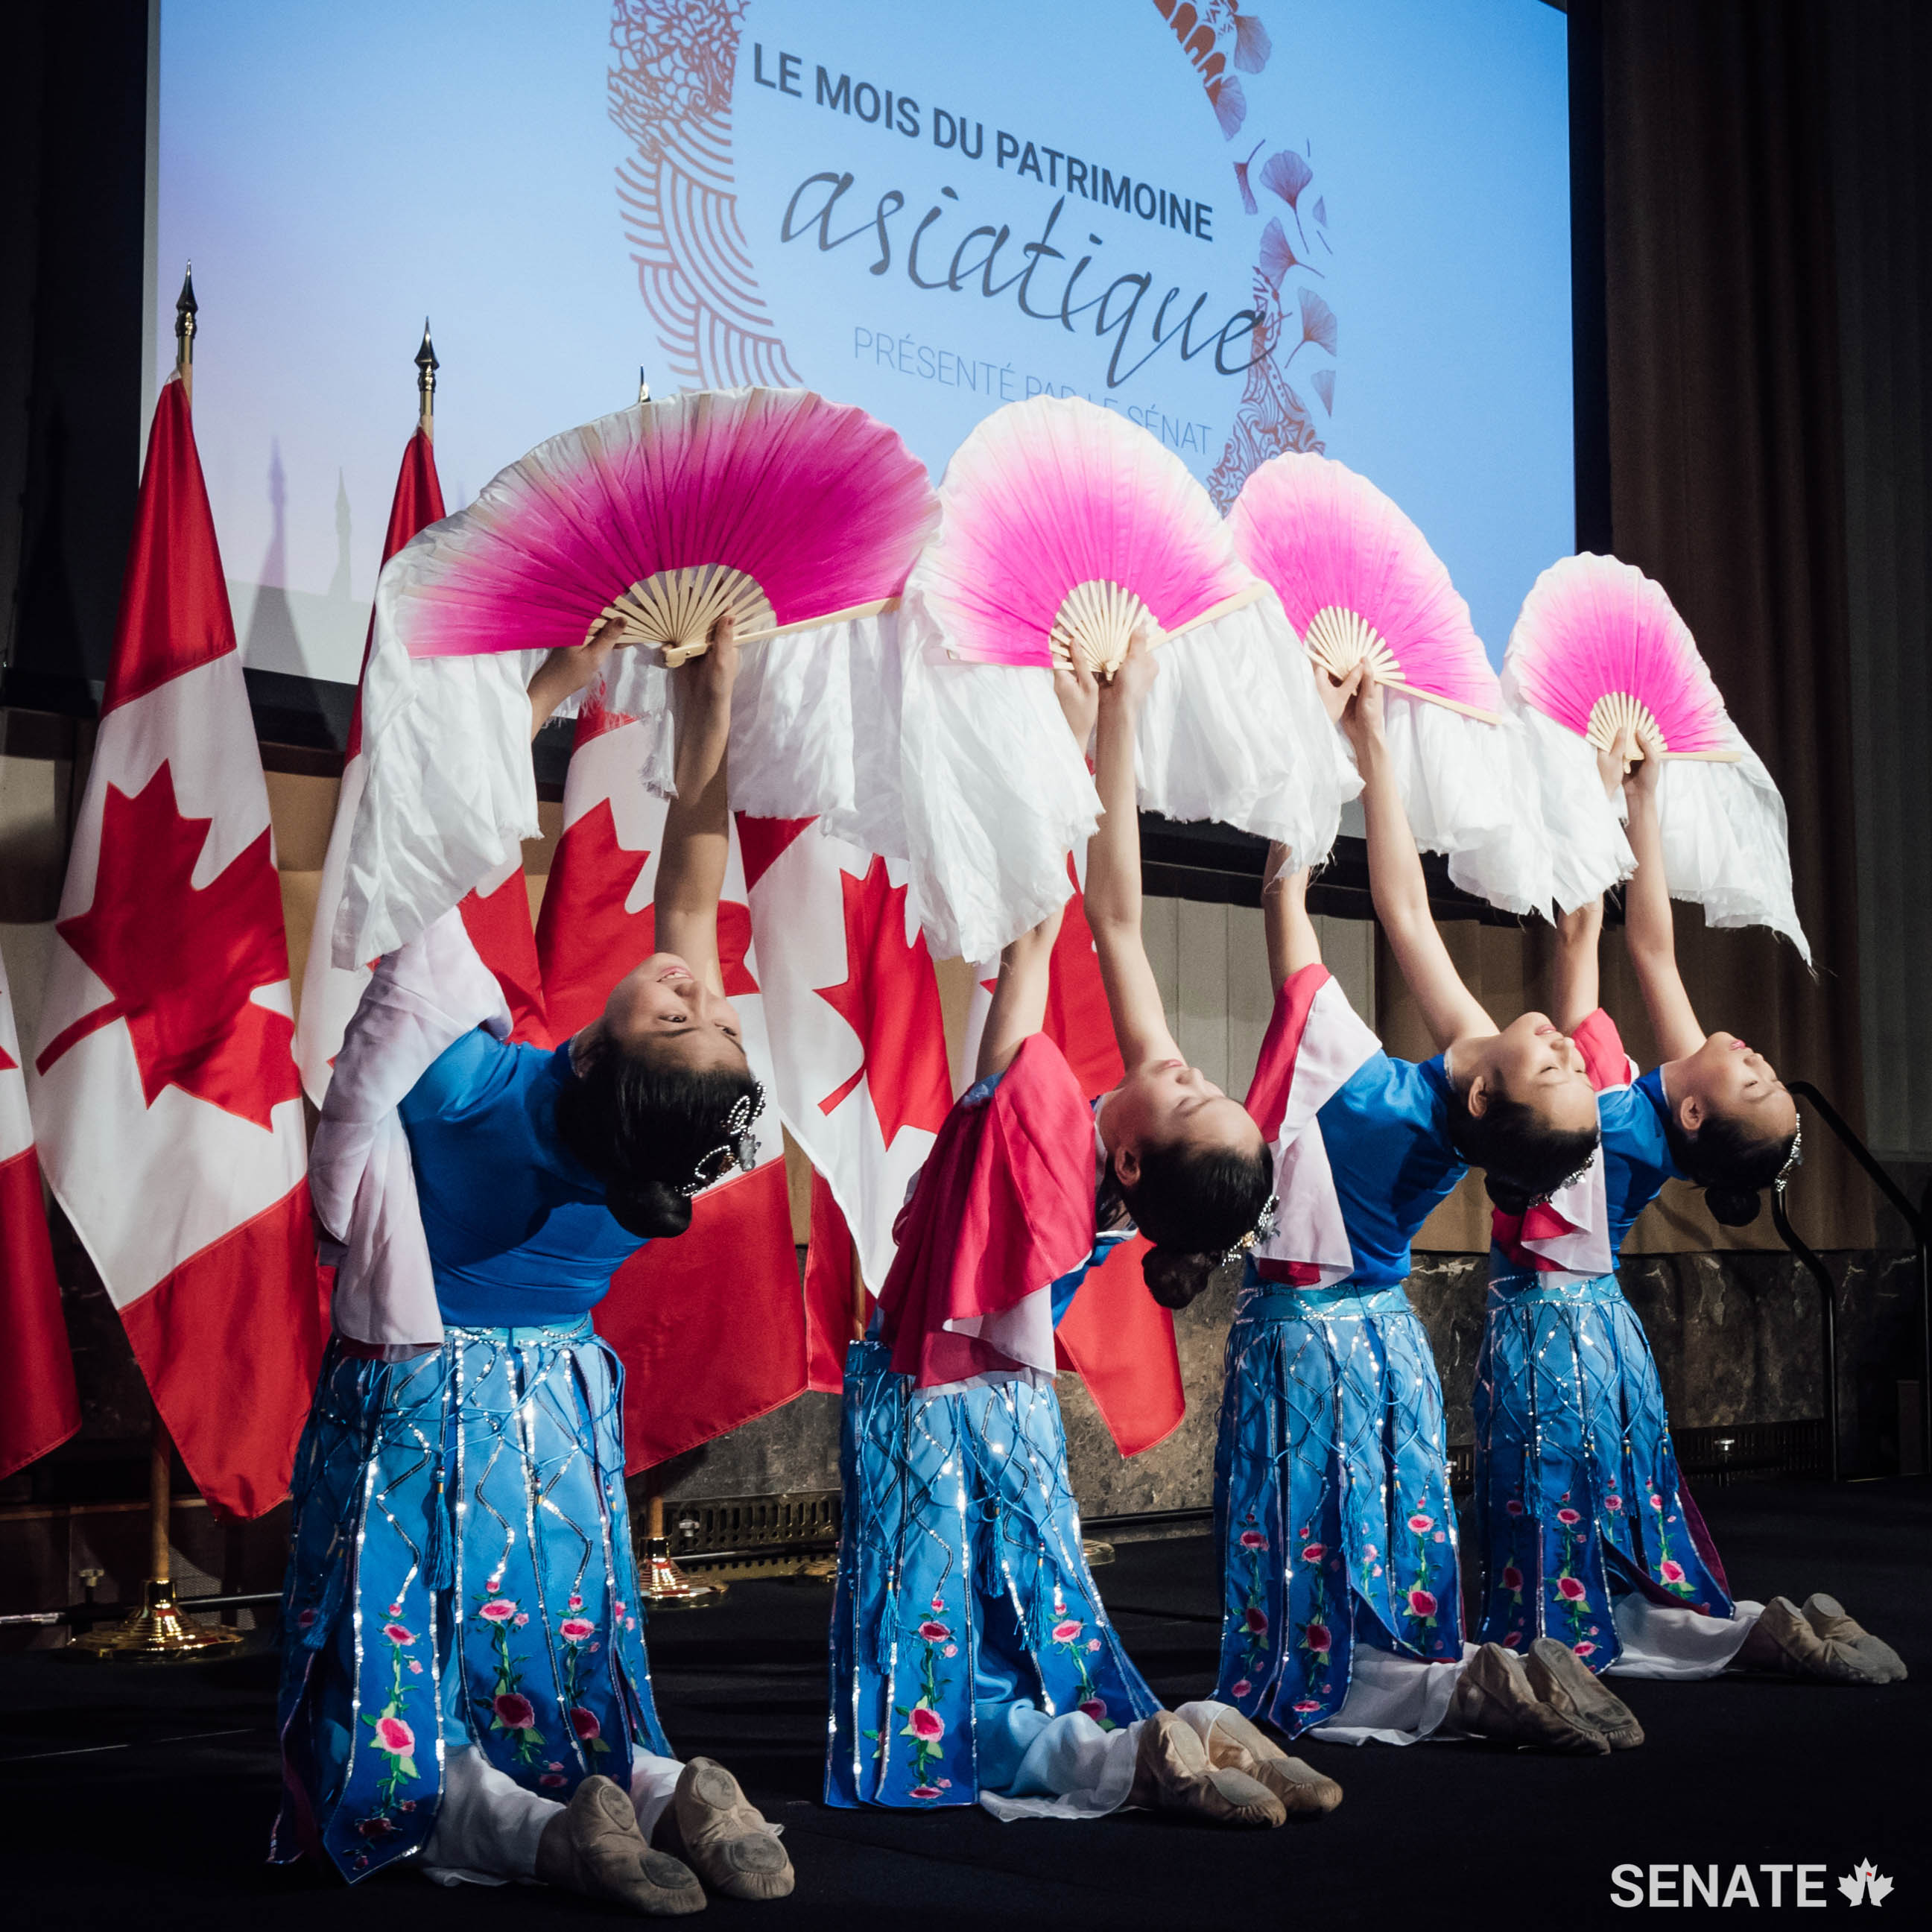 Dancers from the Haiyan Dance Studio perform a blend of Chinese classical and contemporary dance, meant to depict China’s breathtaking scenery.